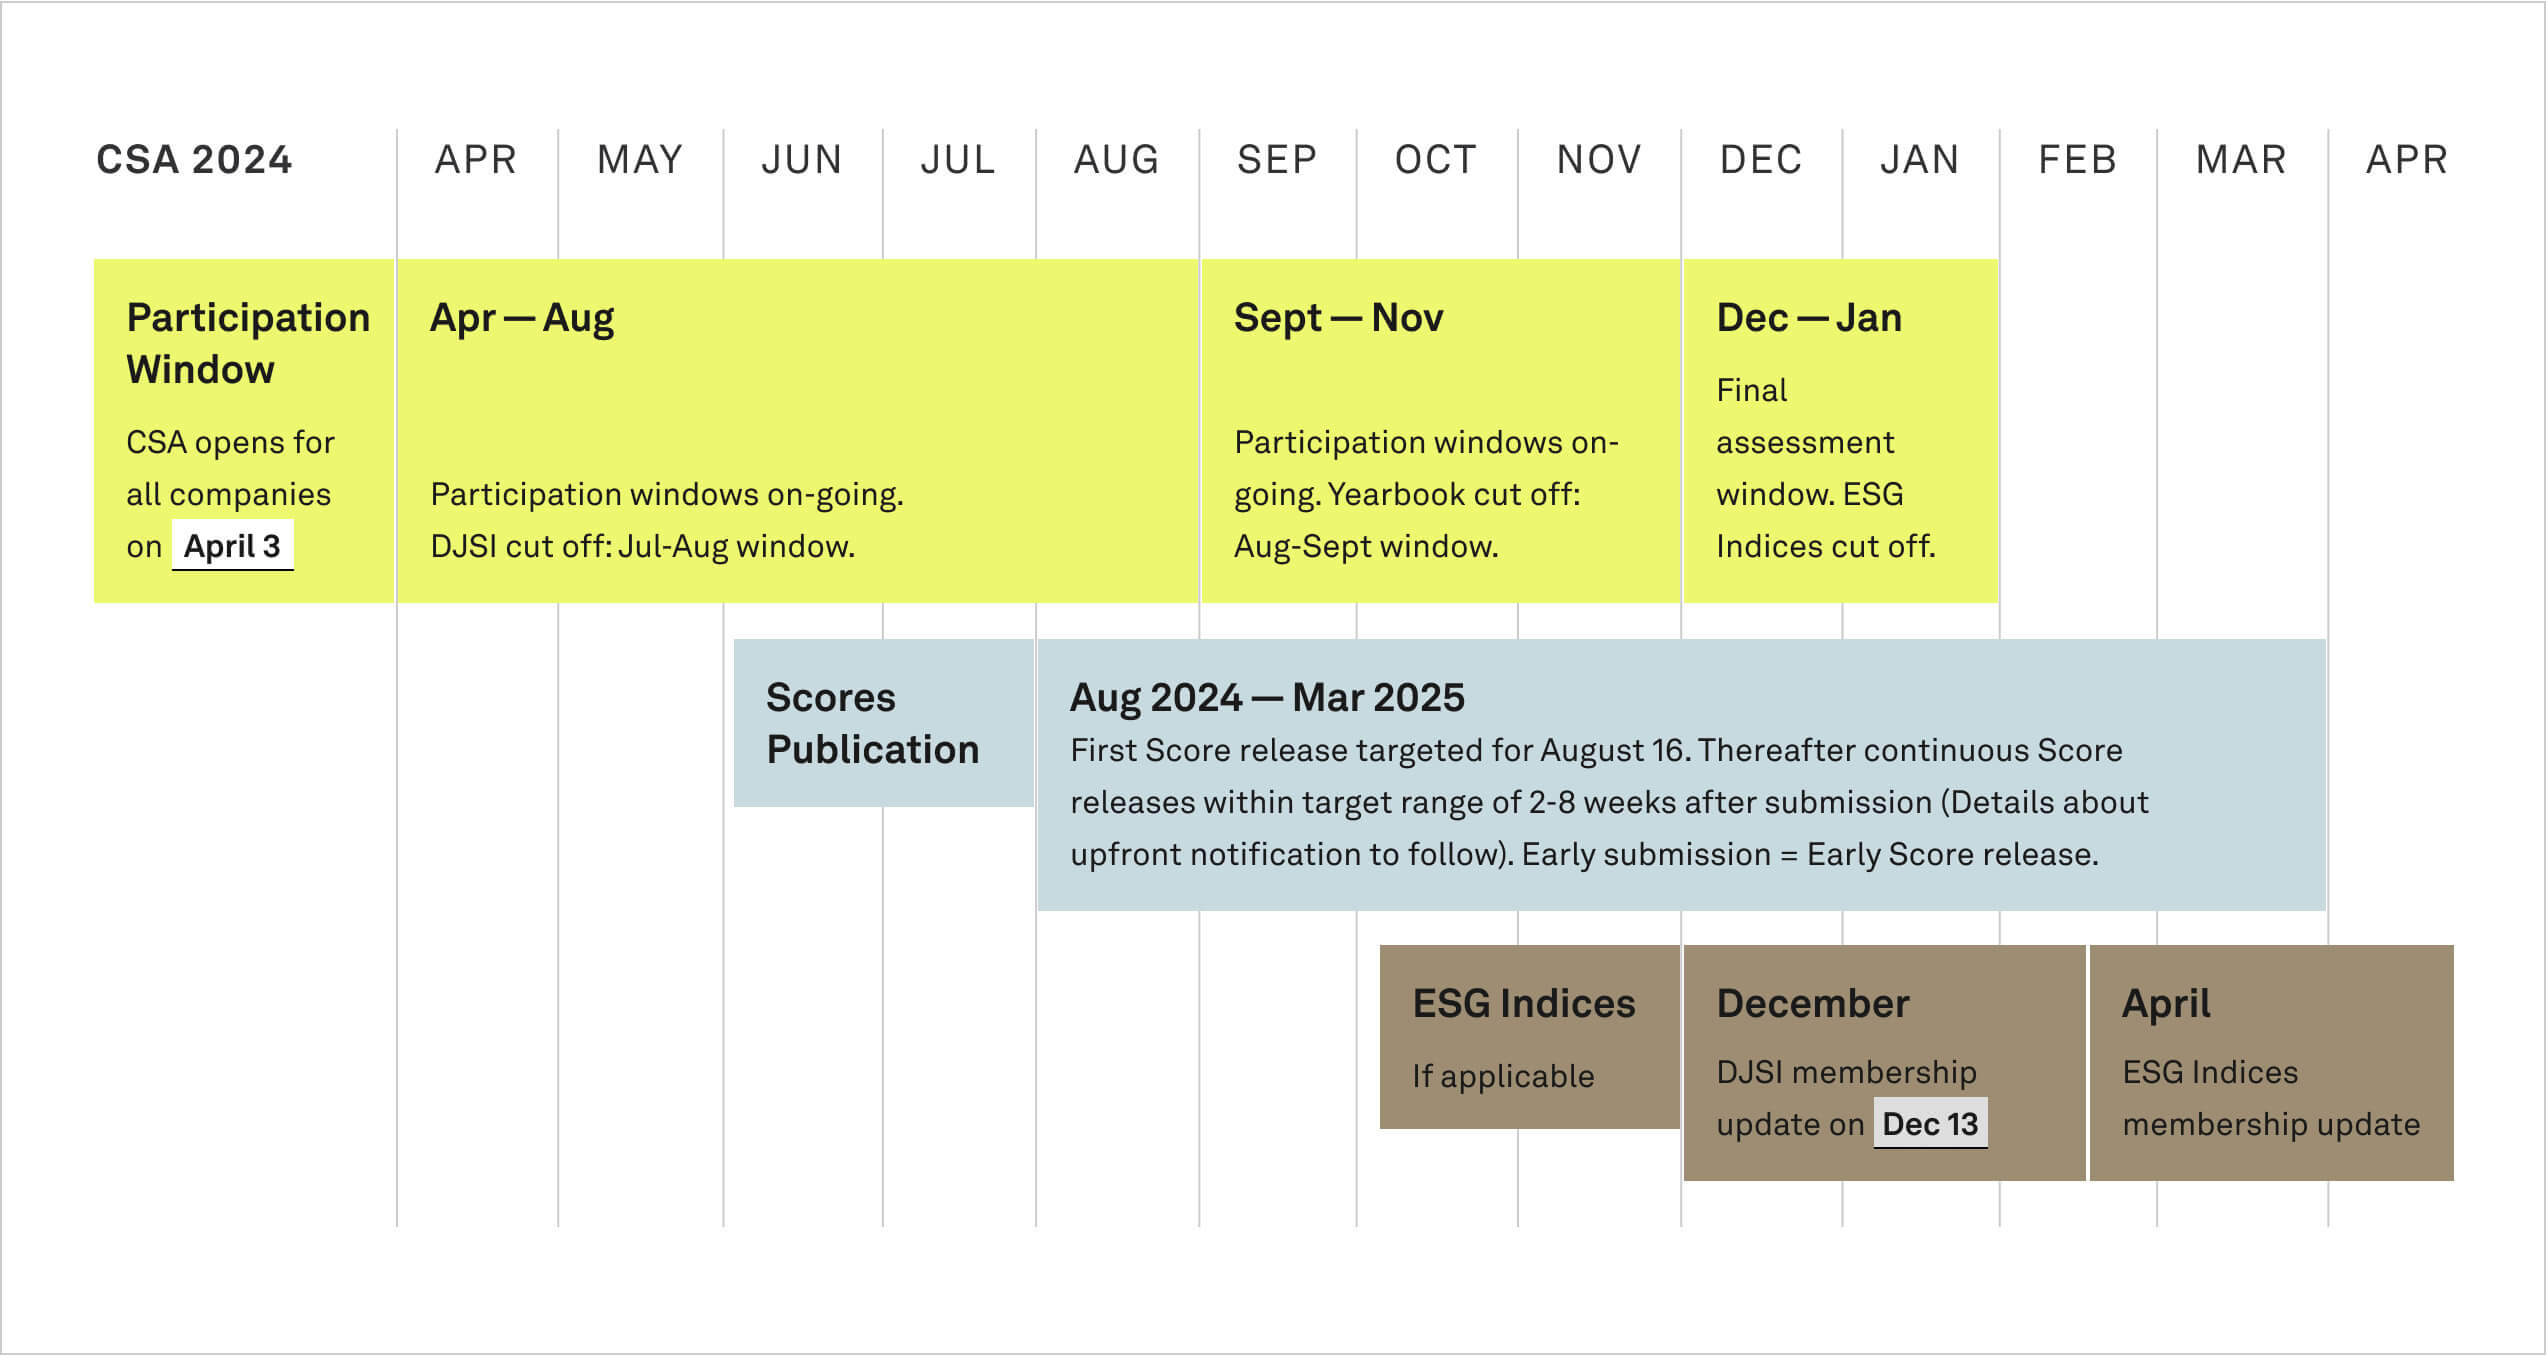 CSA 2024 - Participation Cycle Timeline